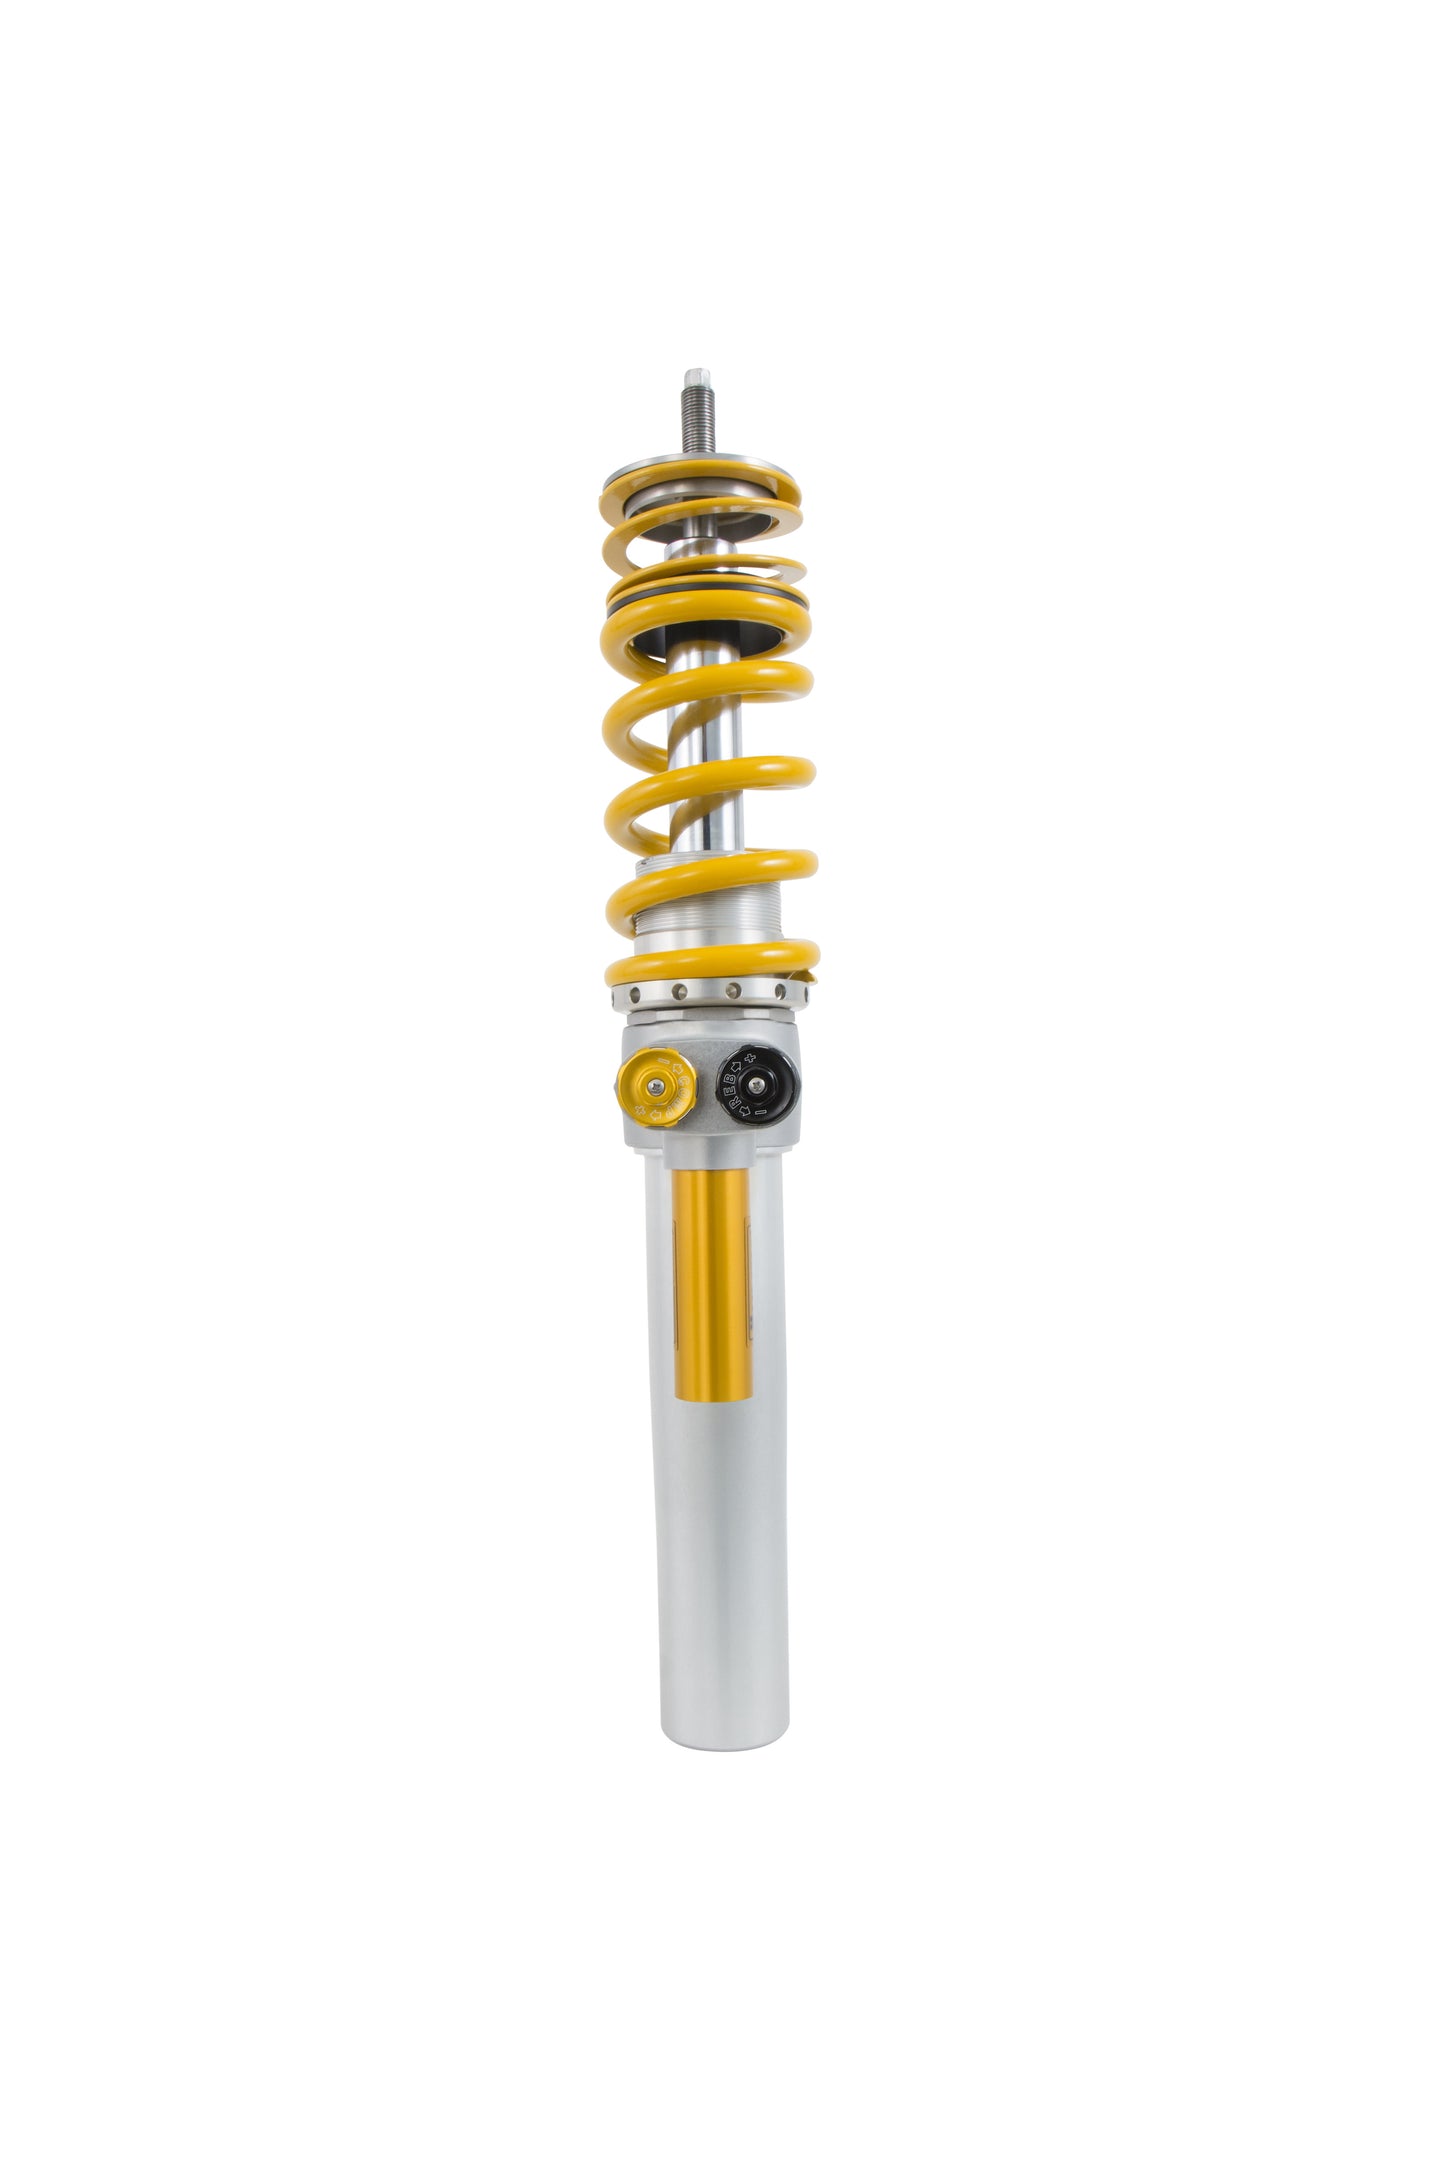 Front view of an Öhlins racing coil over with distinctive gold and yellow coloring, yellow coil springs attached with adjustable dials & separate reservoir